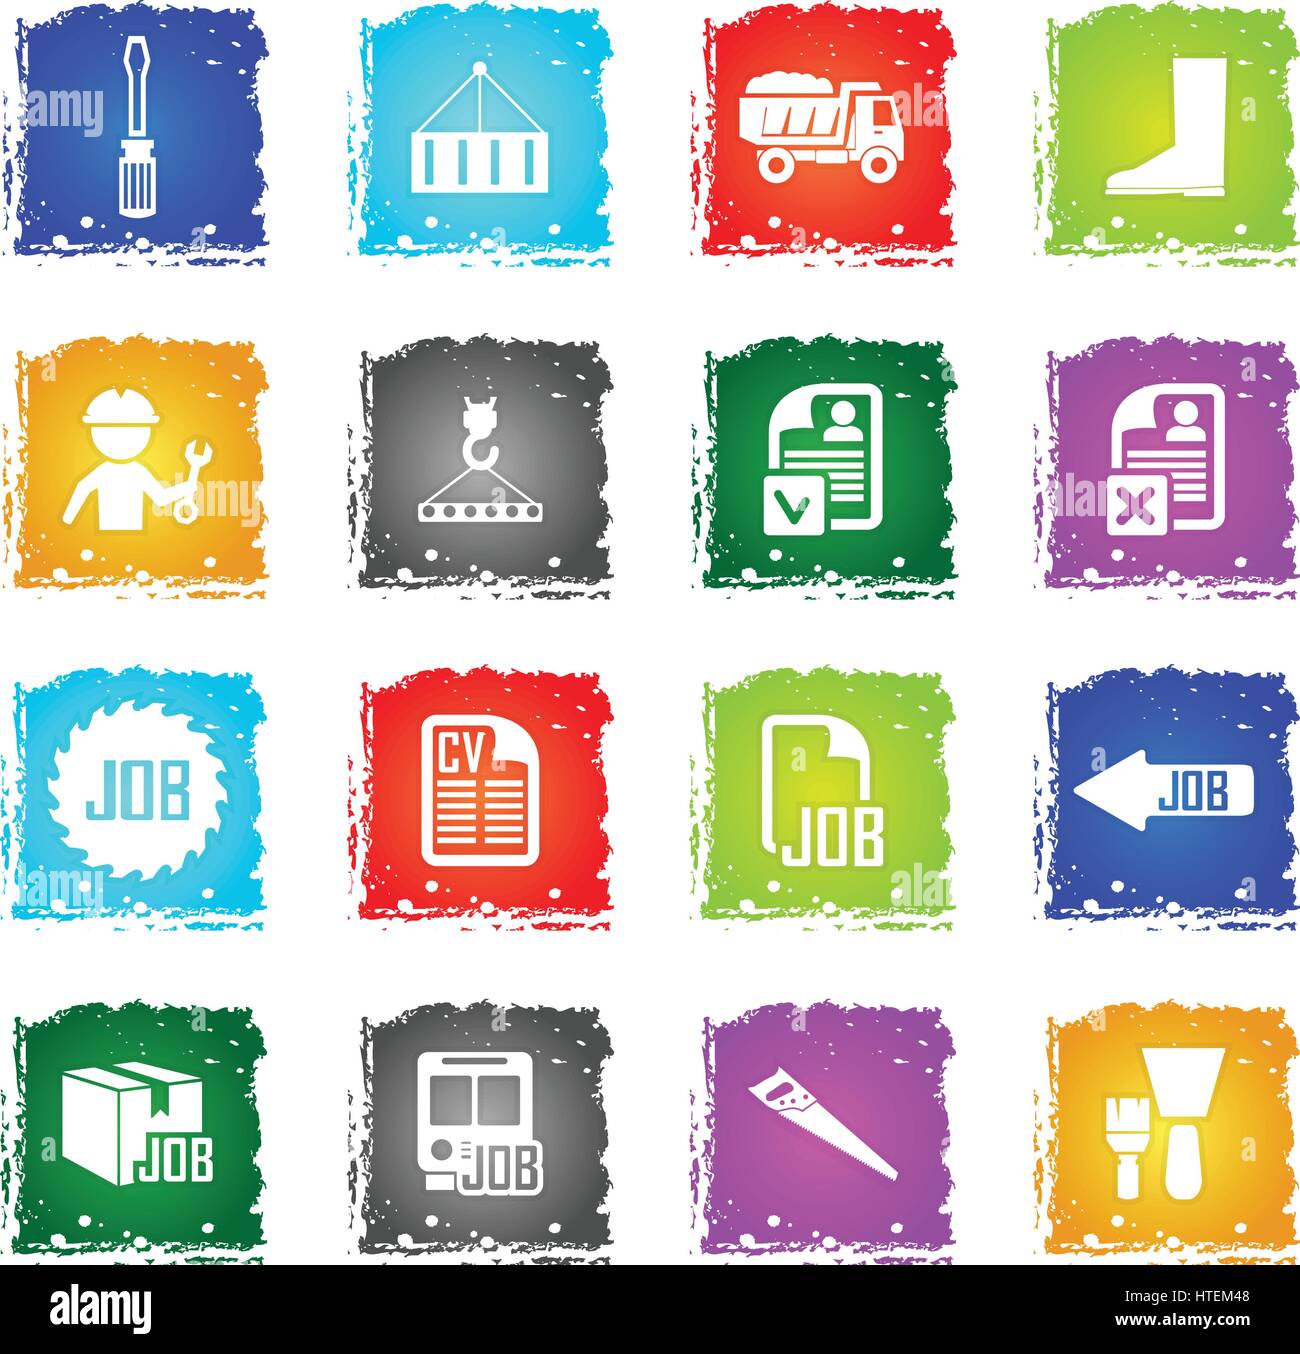 job search vector web icons in grunge style for user interface design Stock Vector